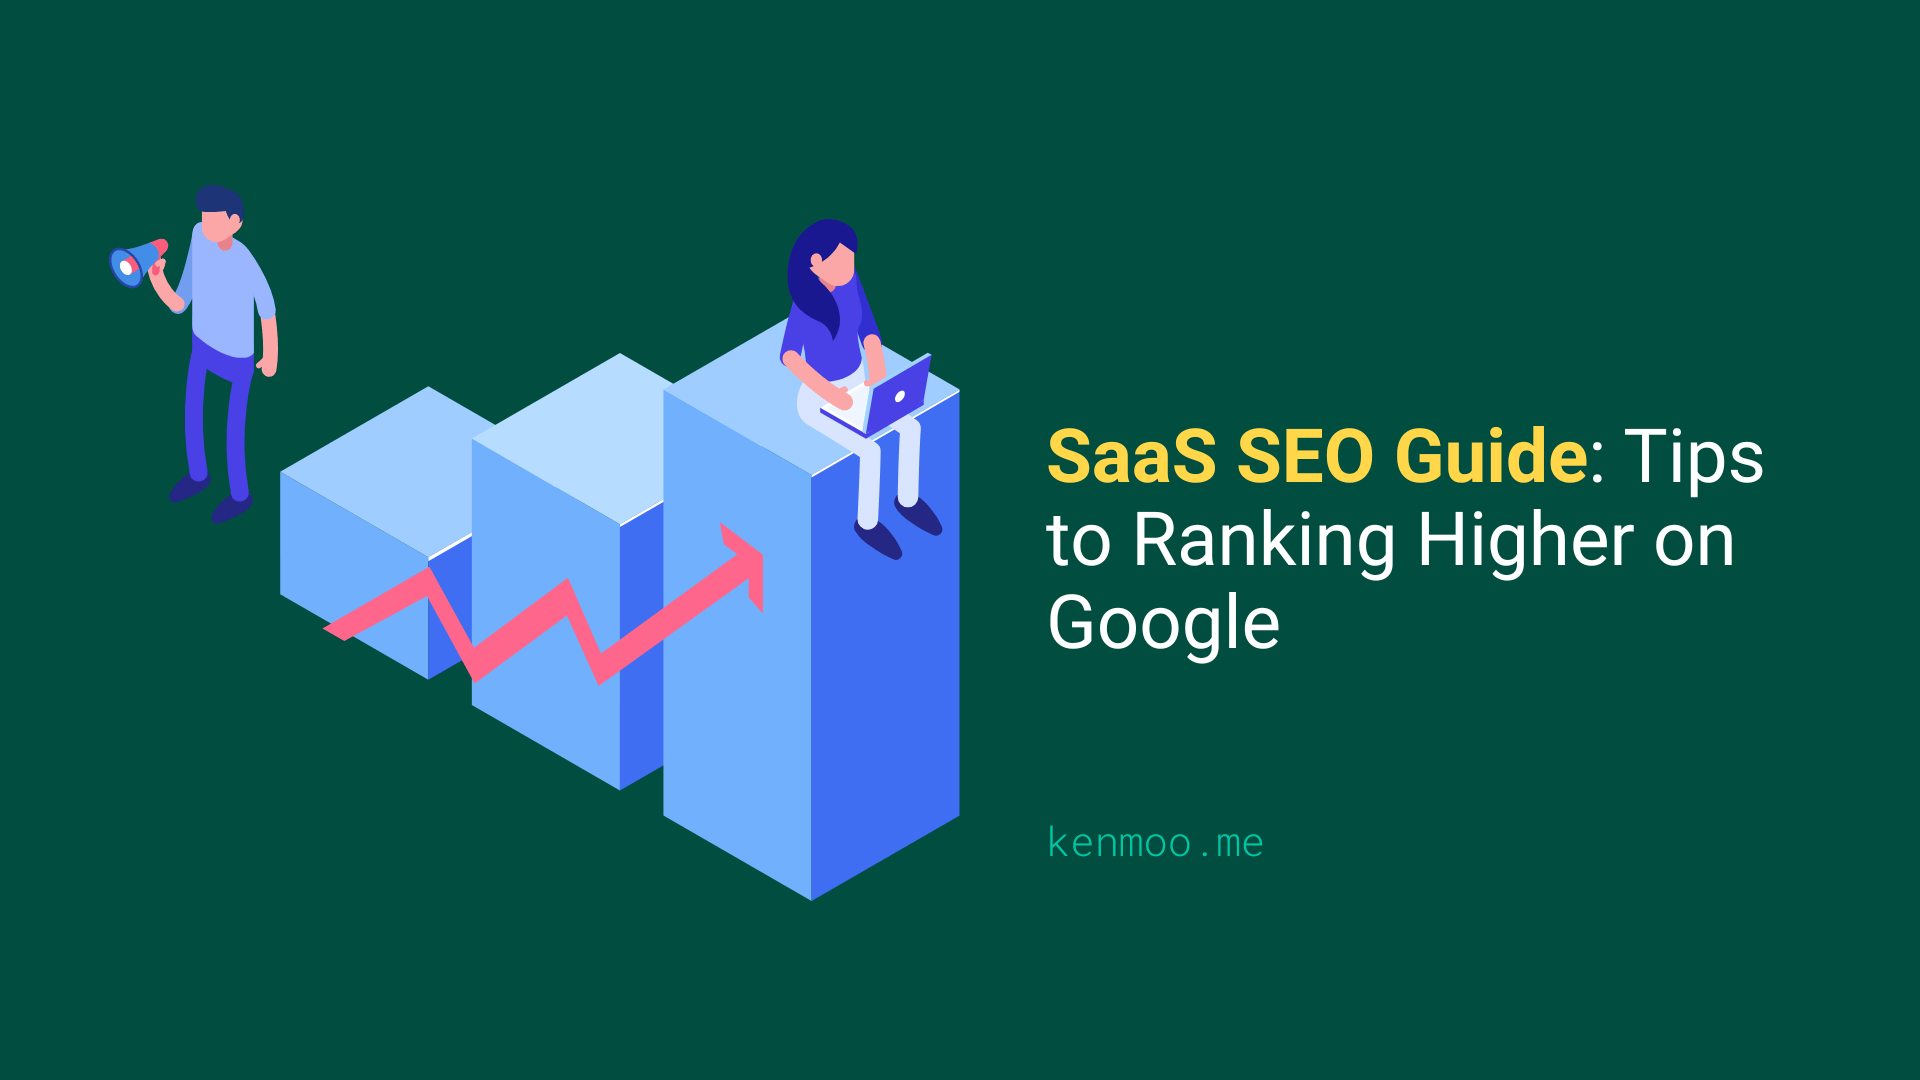 SaaS SEO Guide: Tips to Ranking Higher on Google